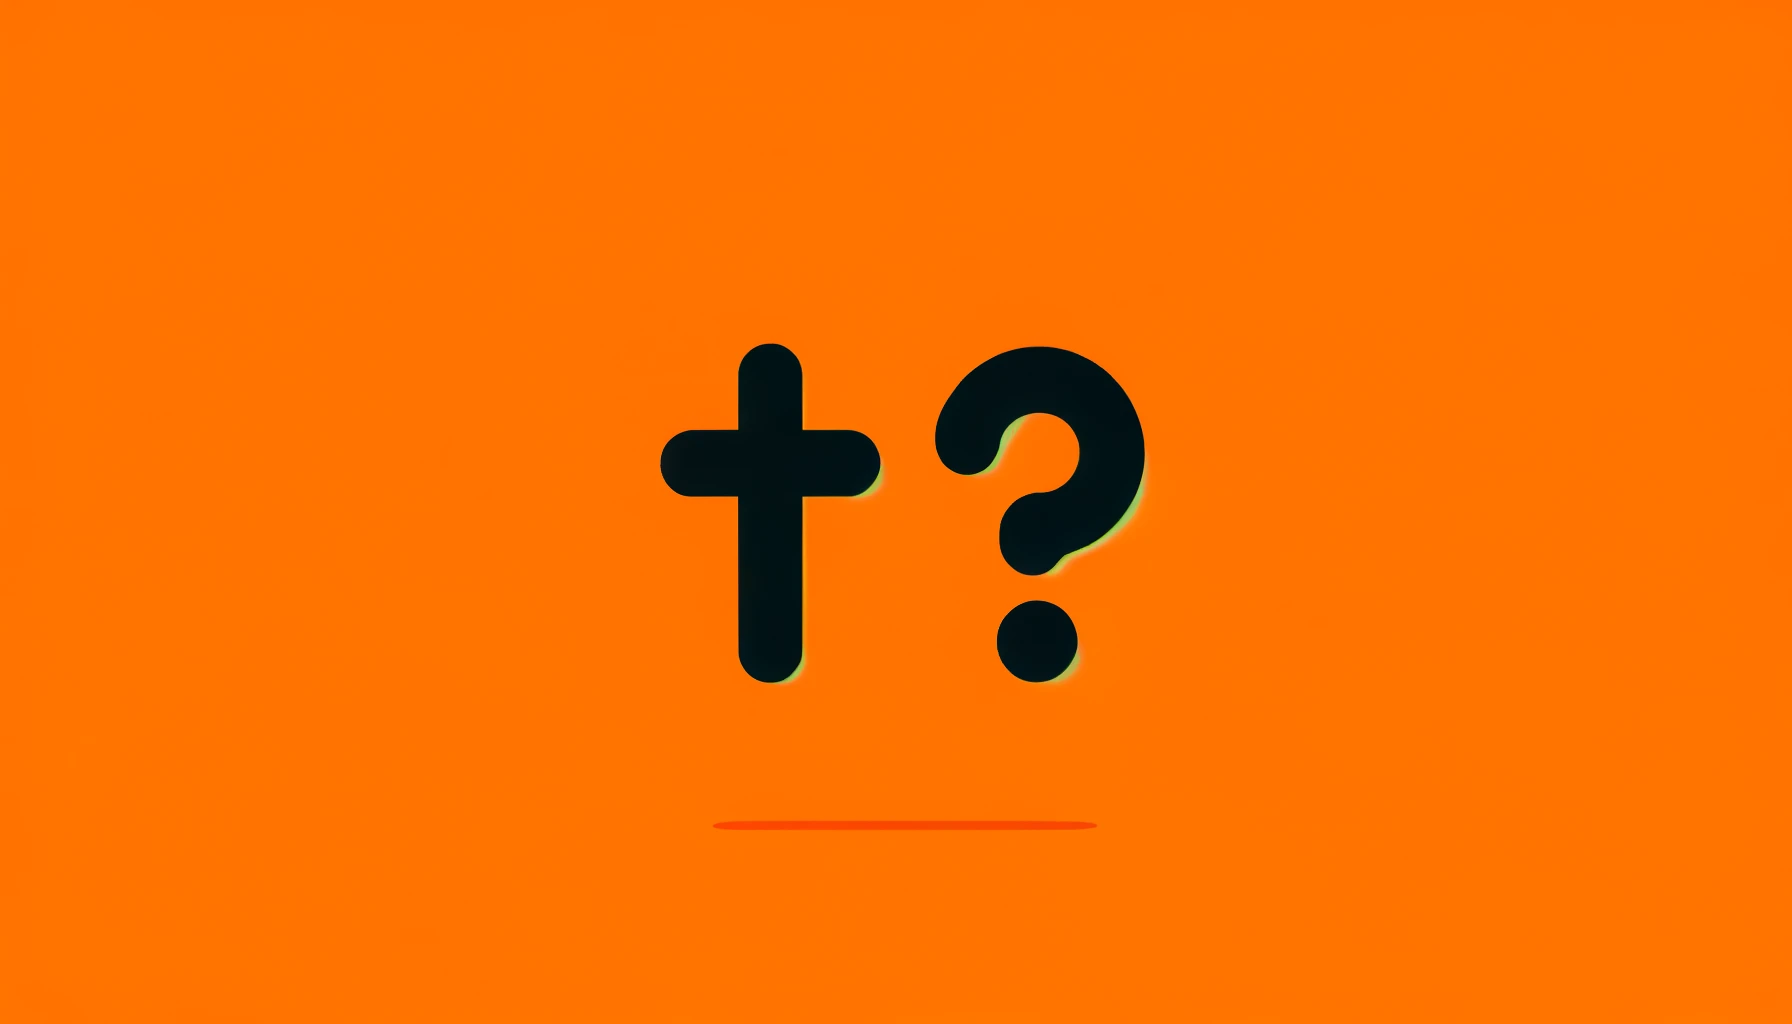 DALL·E 2024 05 25 21.25.43 An image with a 16 9 aspect ratio featuring a minimalistic orange background. On the left side a simple black icon of a Christian cross and next to